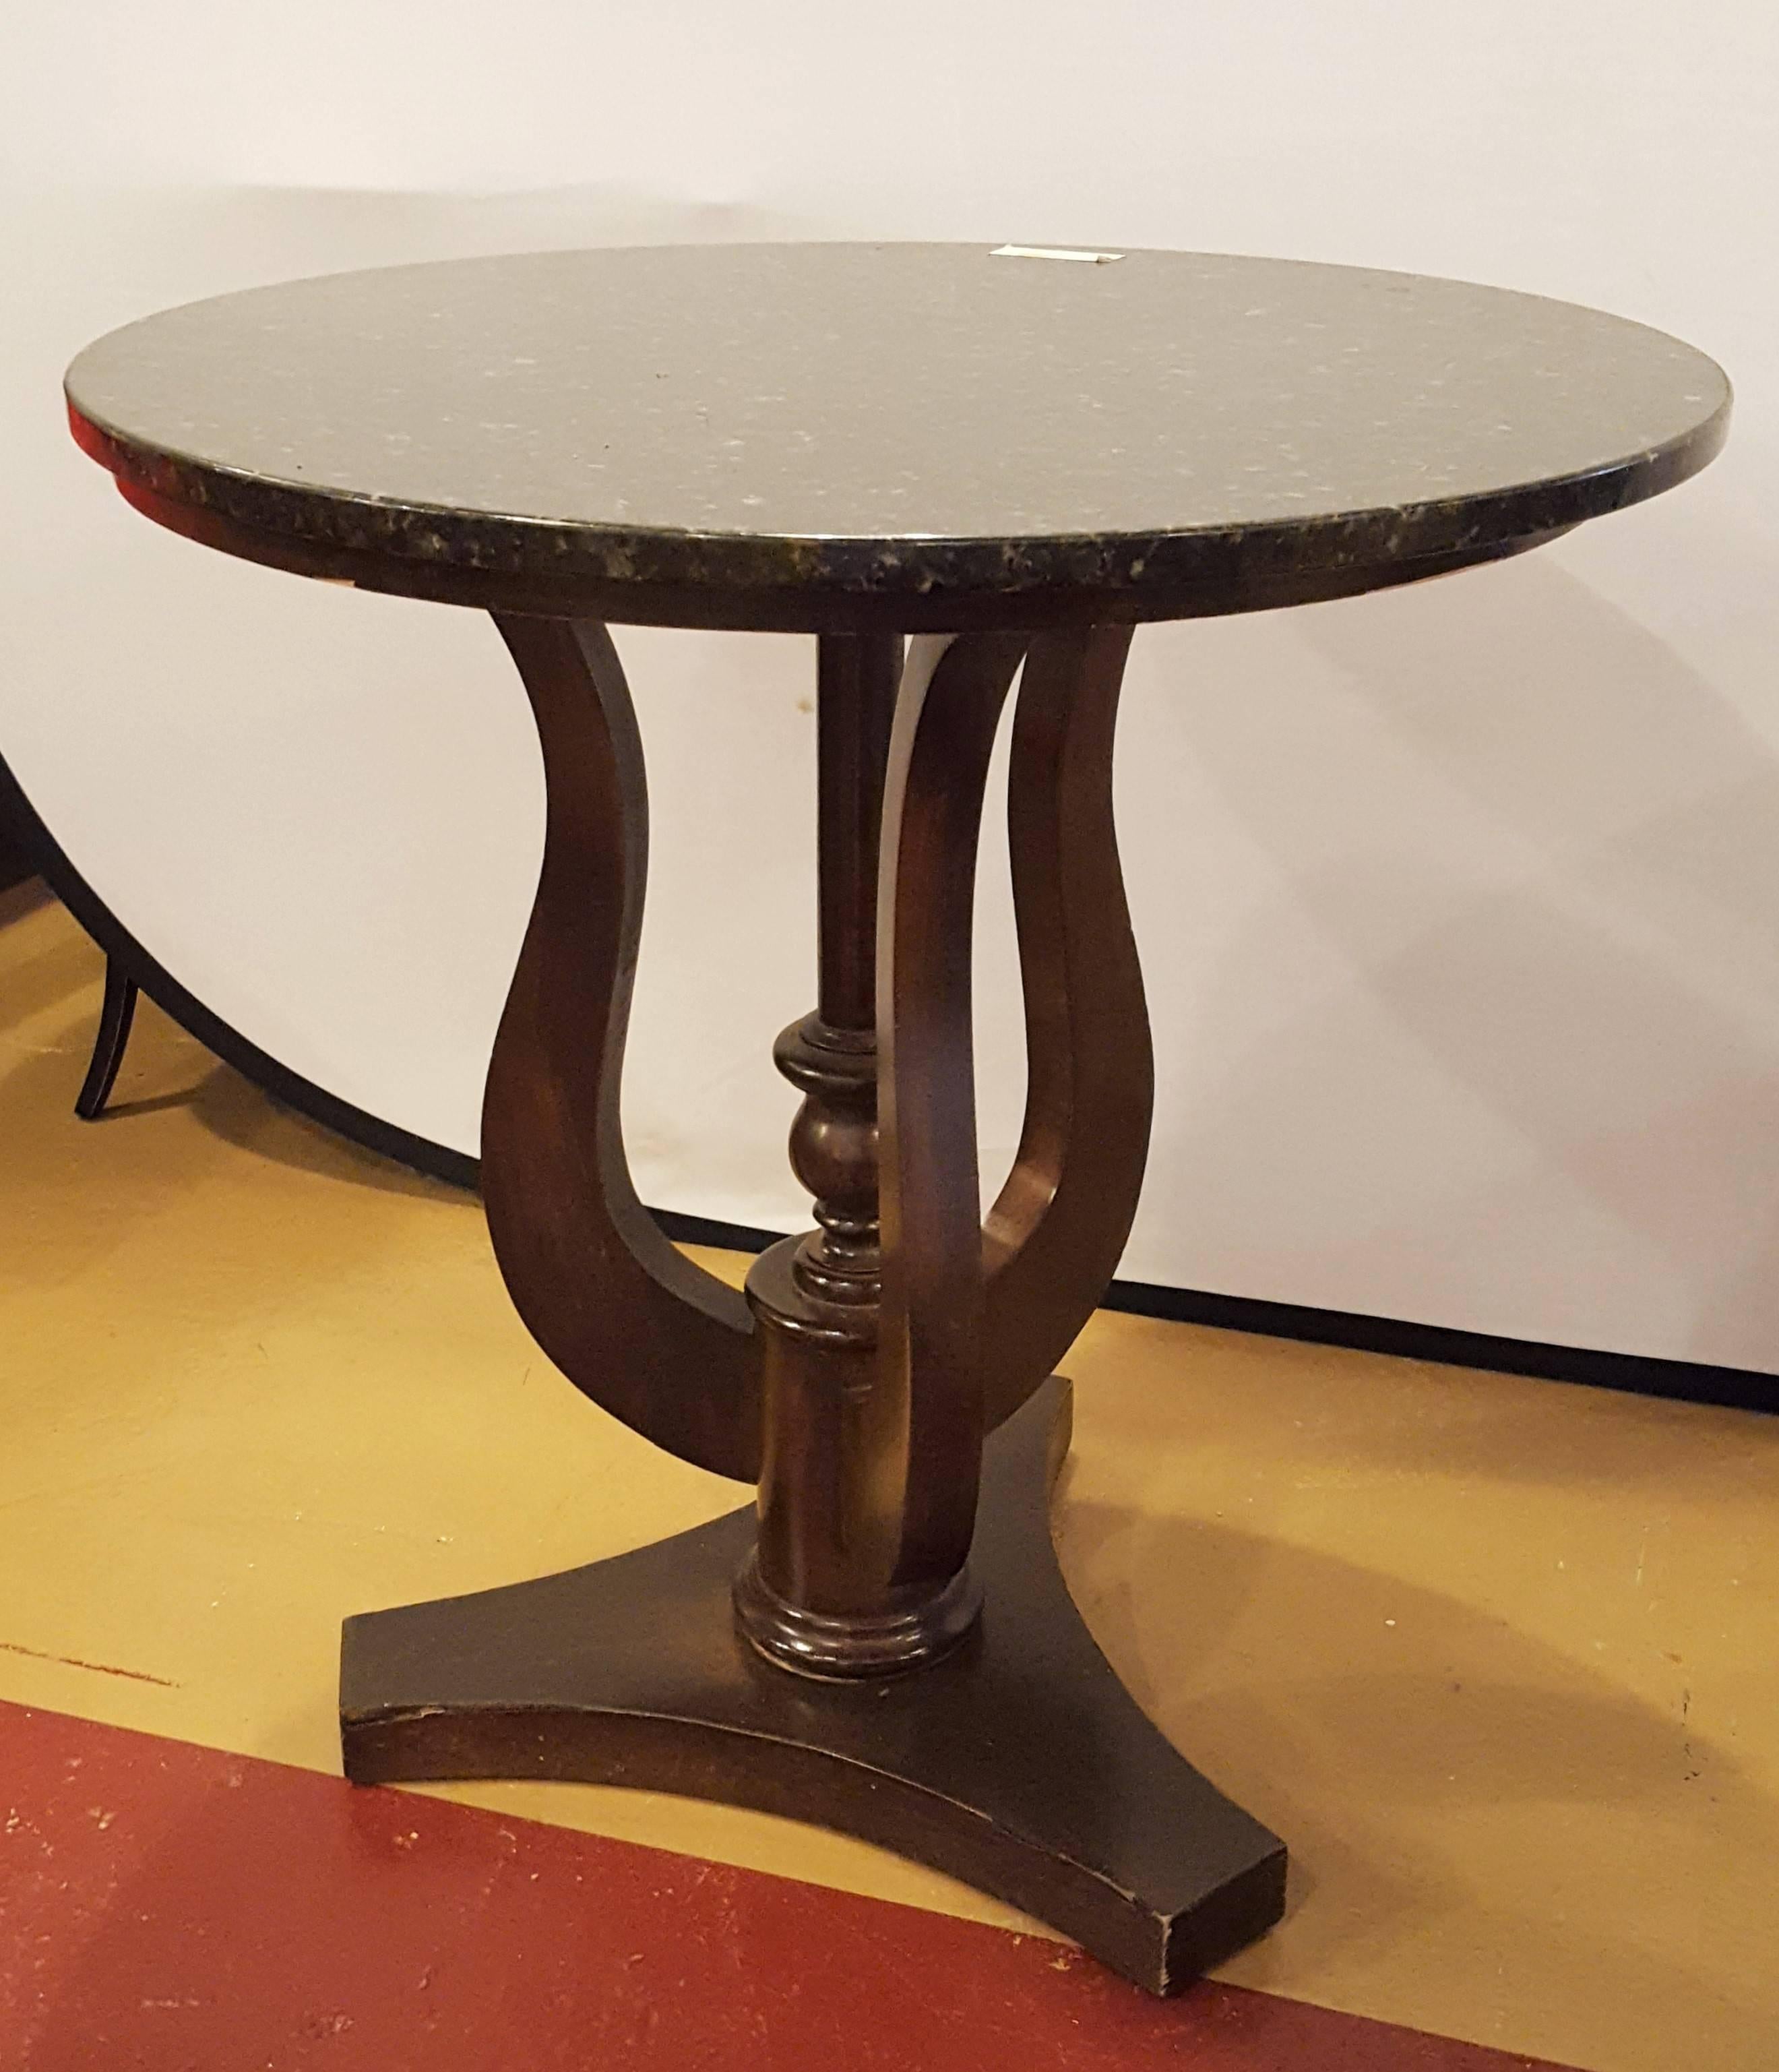 Pair of marble-top side tables. These tables have a beautiful, elegant, sleek look to them, will look great in any room or office.